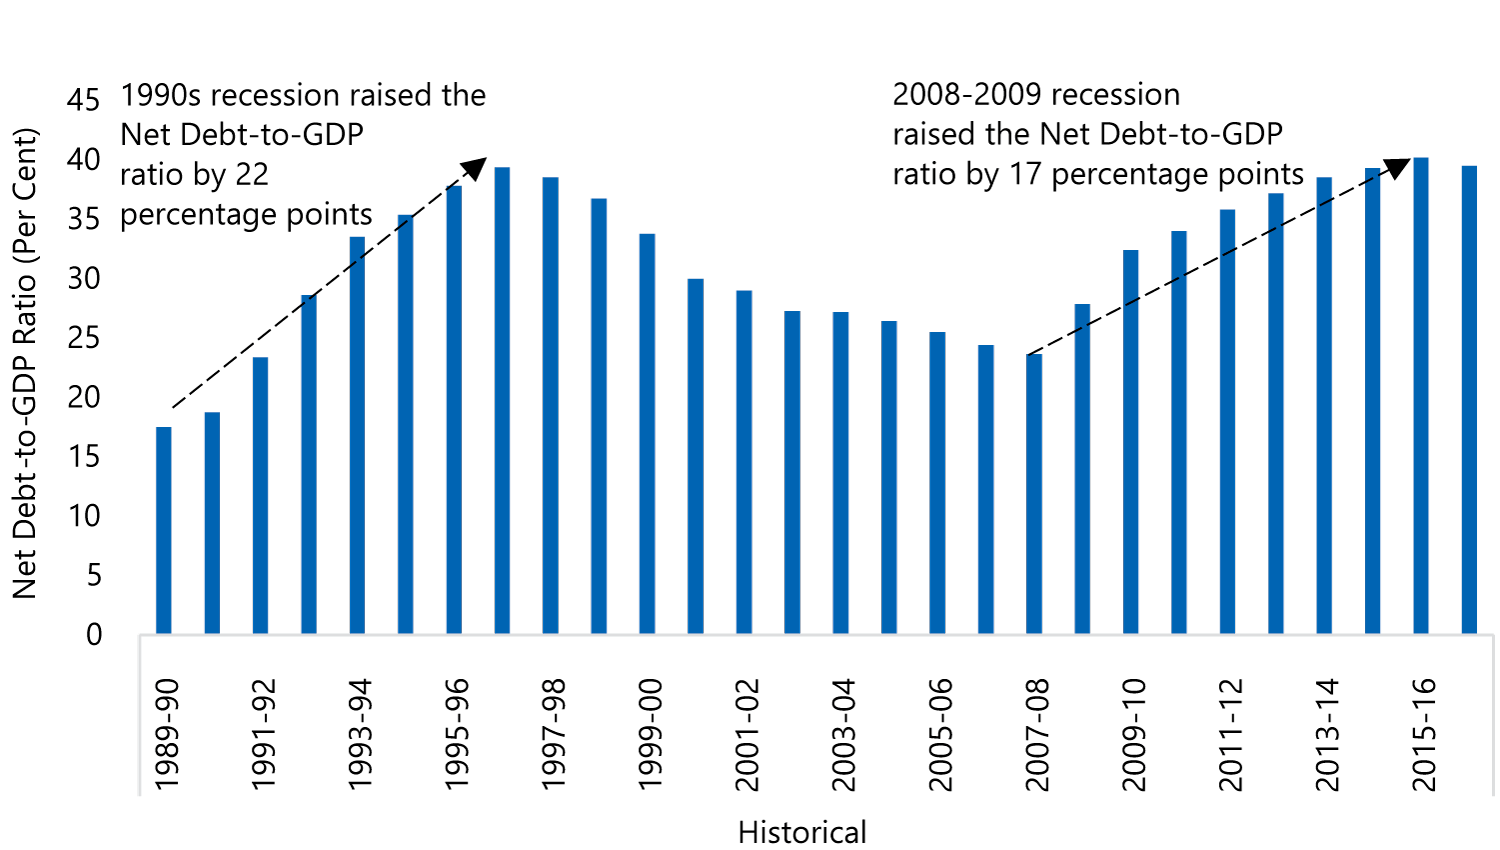 Ontario’s Net Debt-to-GDP Ratio Increased Sharply After Recessions